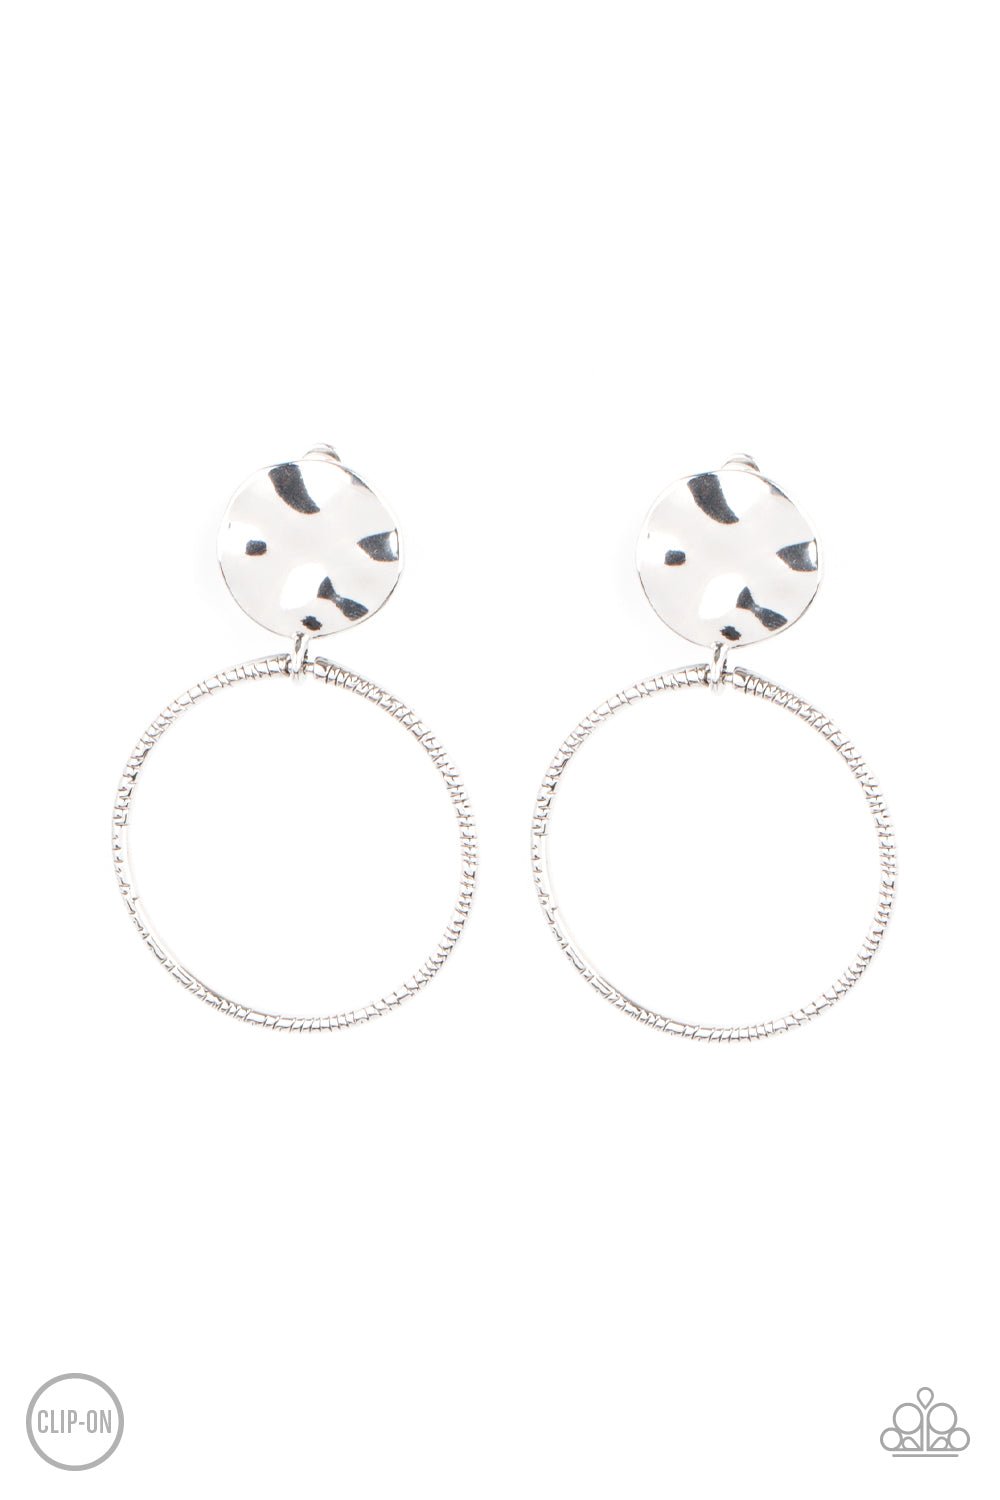 Undeniably Urban Silver Clip-On Earring - Paparazzi Accessories  A textured silver hoop attaches to a hammered silver disc, creating an edgy hoop. Earring attaches to a standard clip-on fitting.  All Paparazzi Accessories are lead free and nickel free!  Sold as one pair of clip-on earrings.